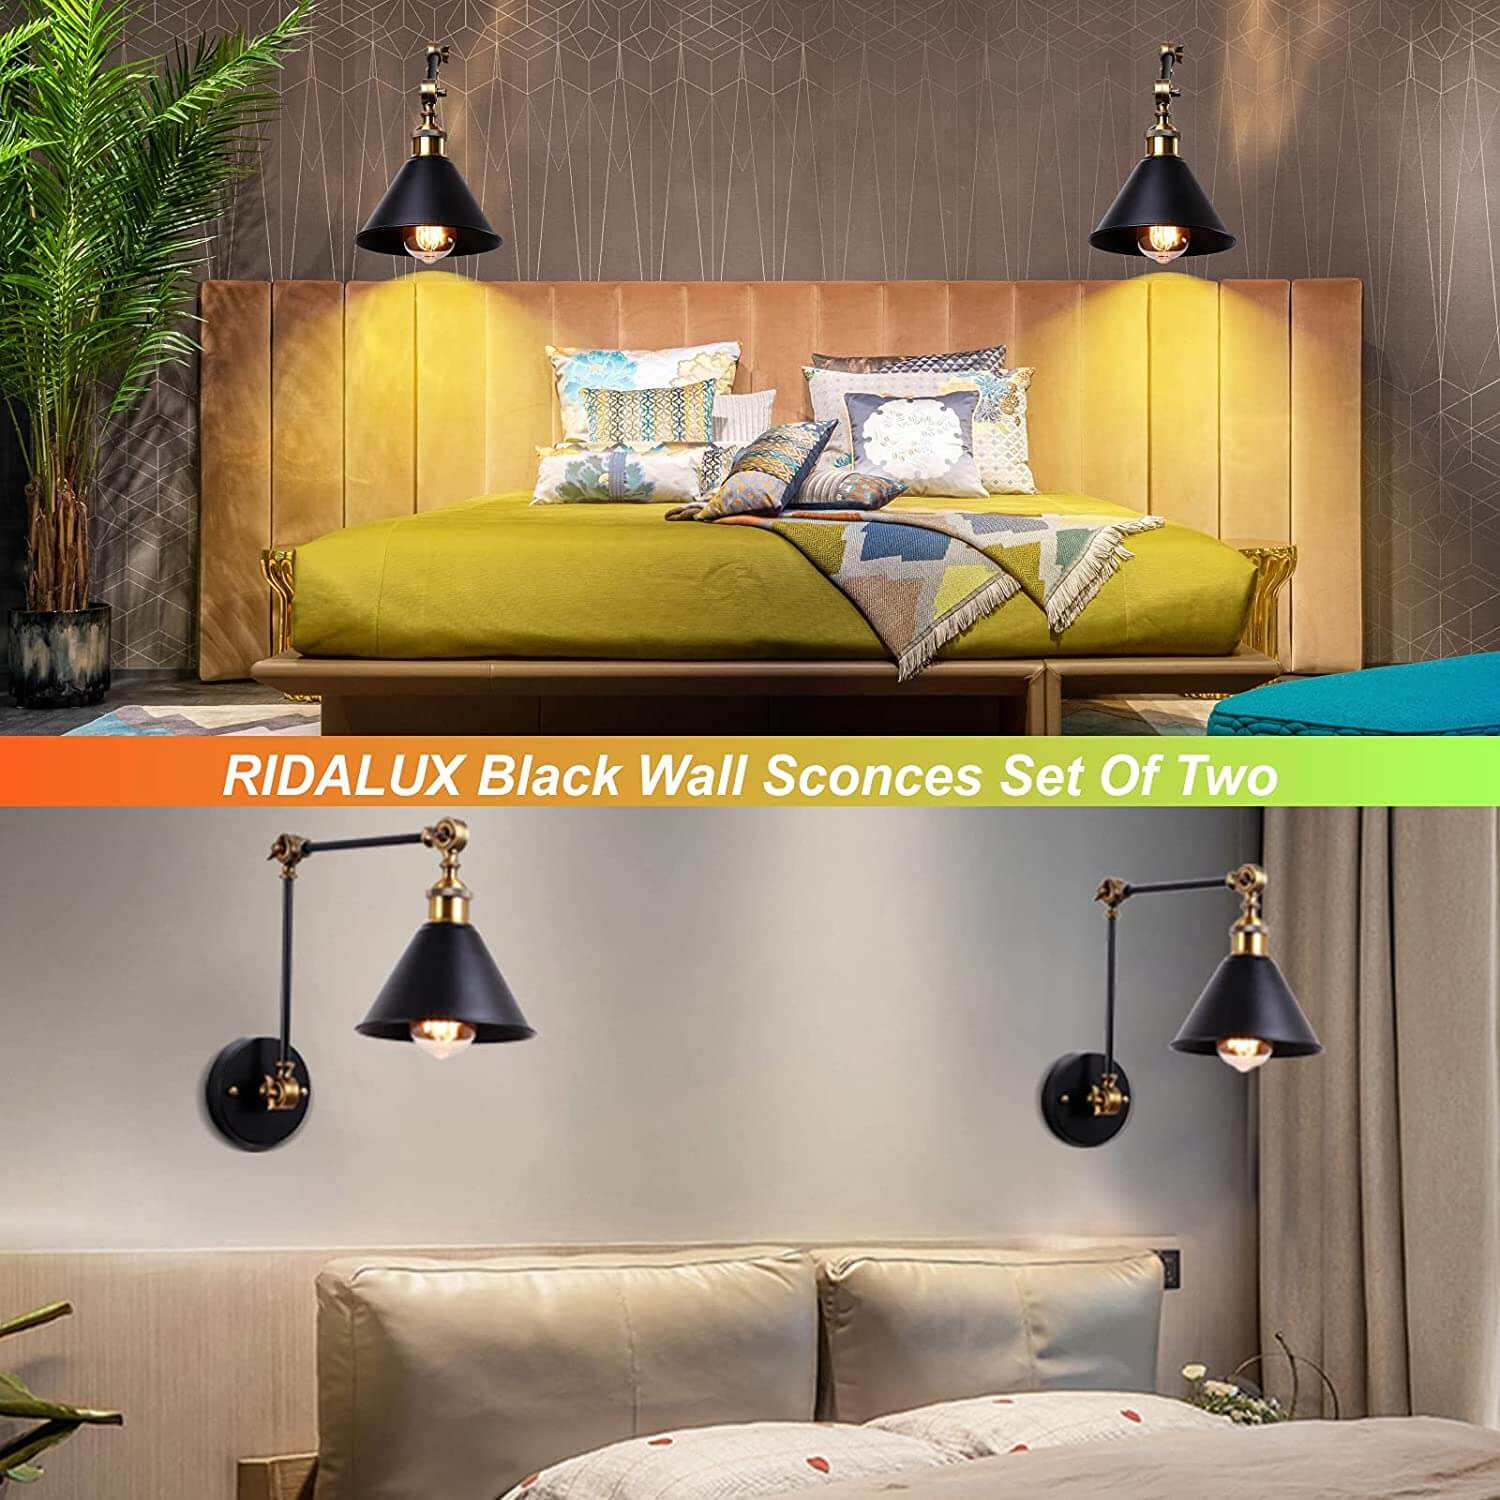 wowow black swing arm wall lamp vintage industrial wall lights